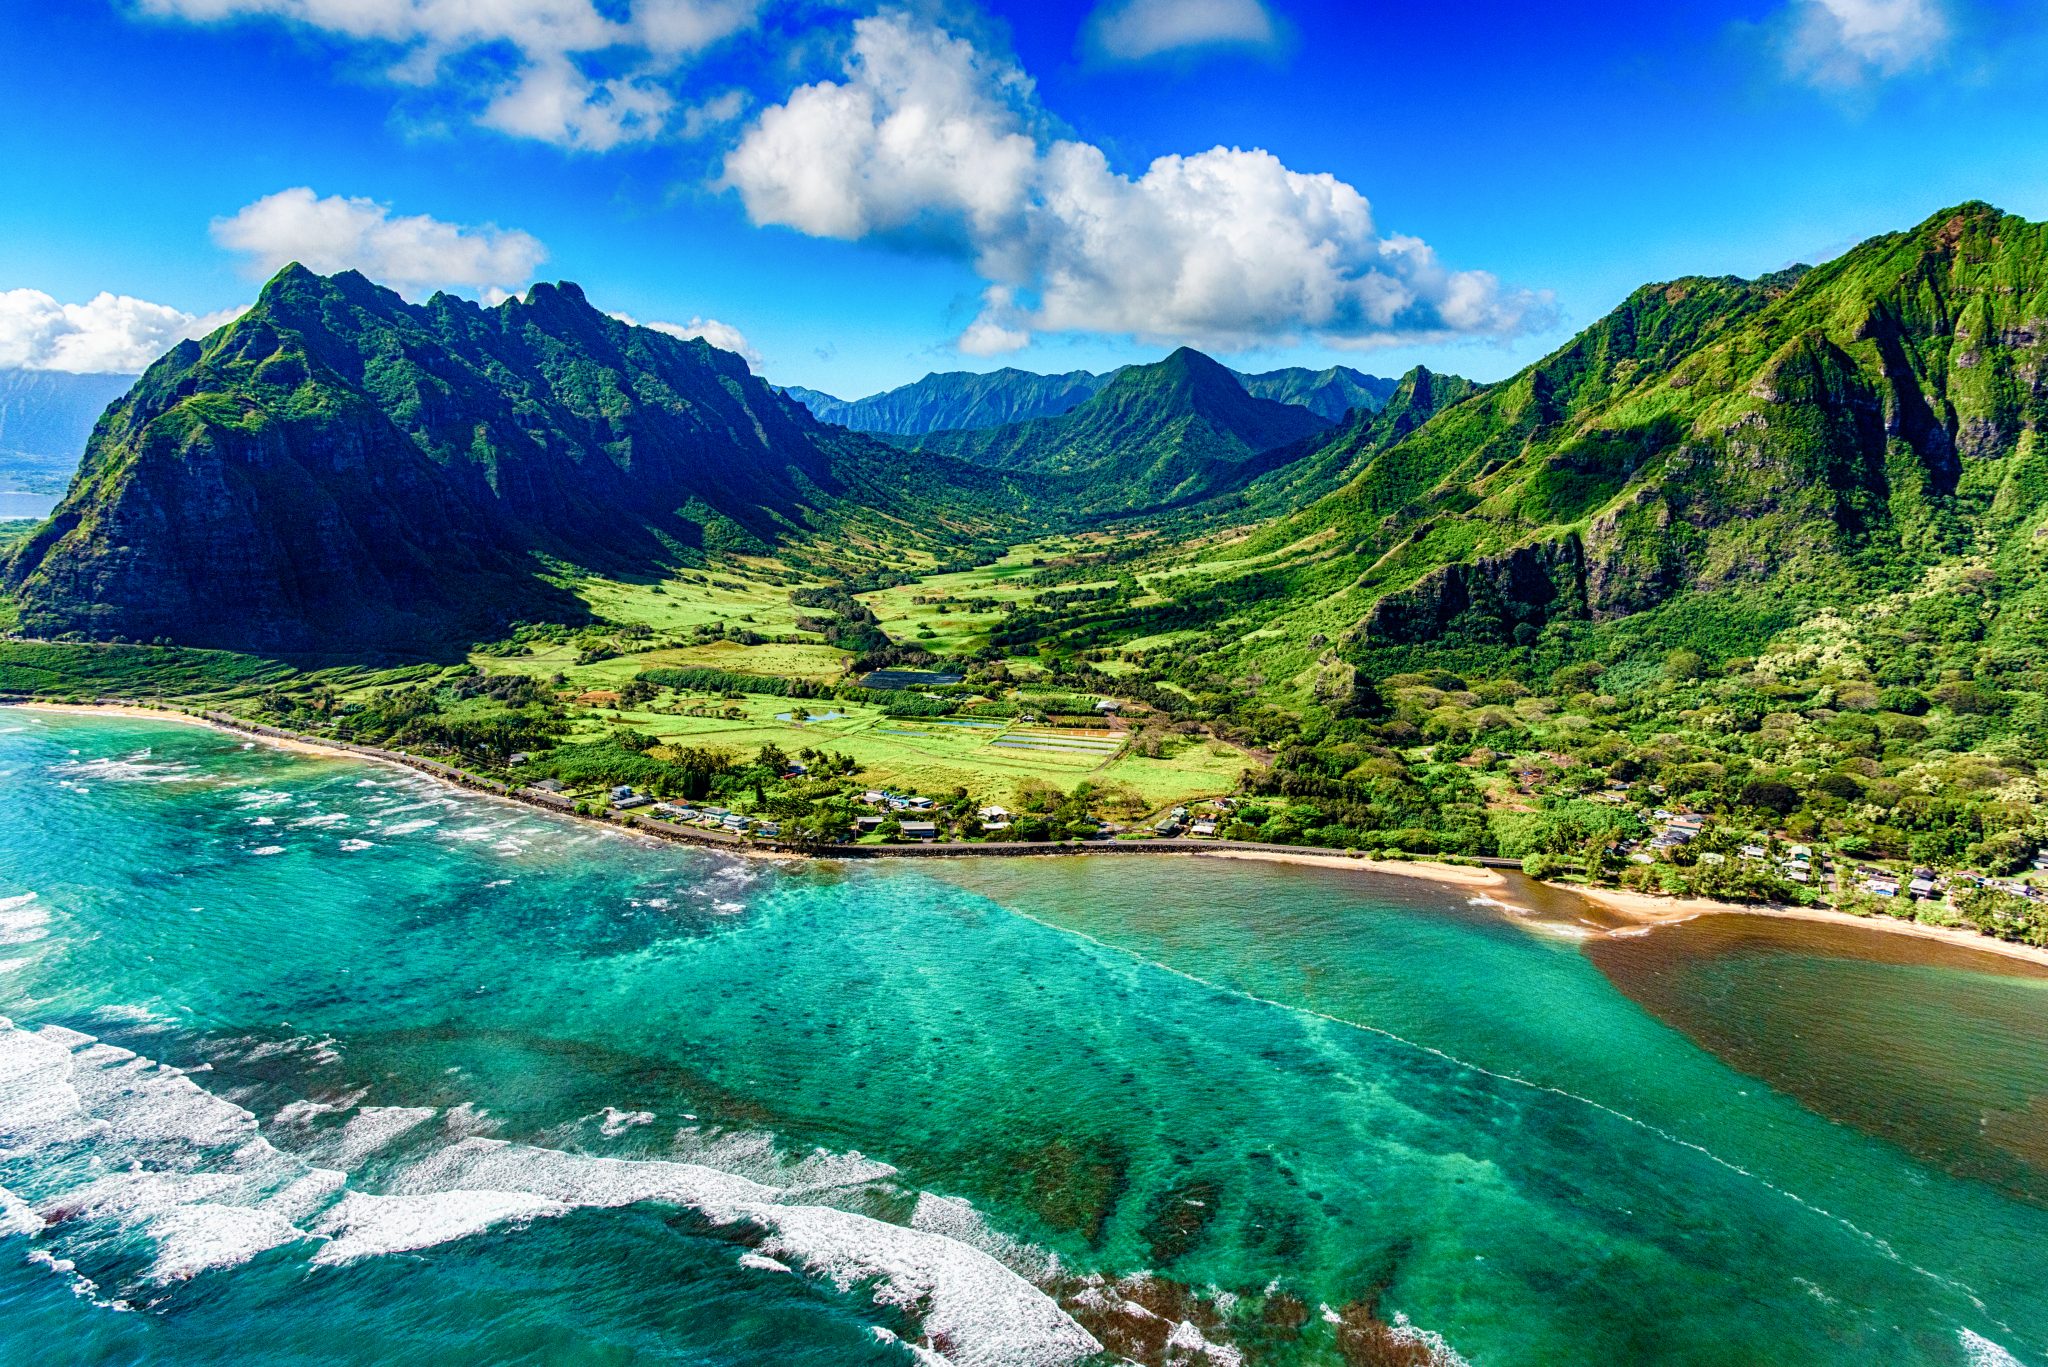 the-beautiful-and-unique-landscape-of-coastal-oahu-hawaii-and-the-kualoa-ranch-where-jurassic-park-was-filmed-as-shot-from-an-altitude-of-about-1000-feet-over-the-pacific-ocean-stockpack-istock